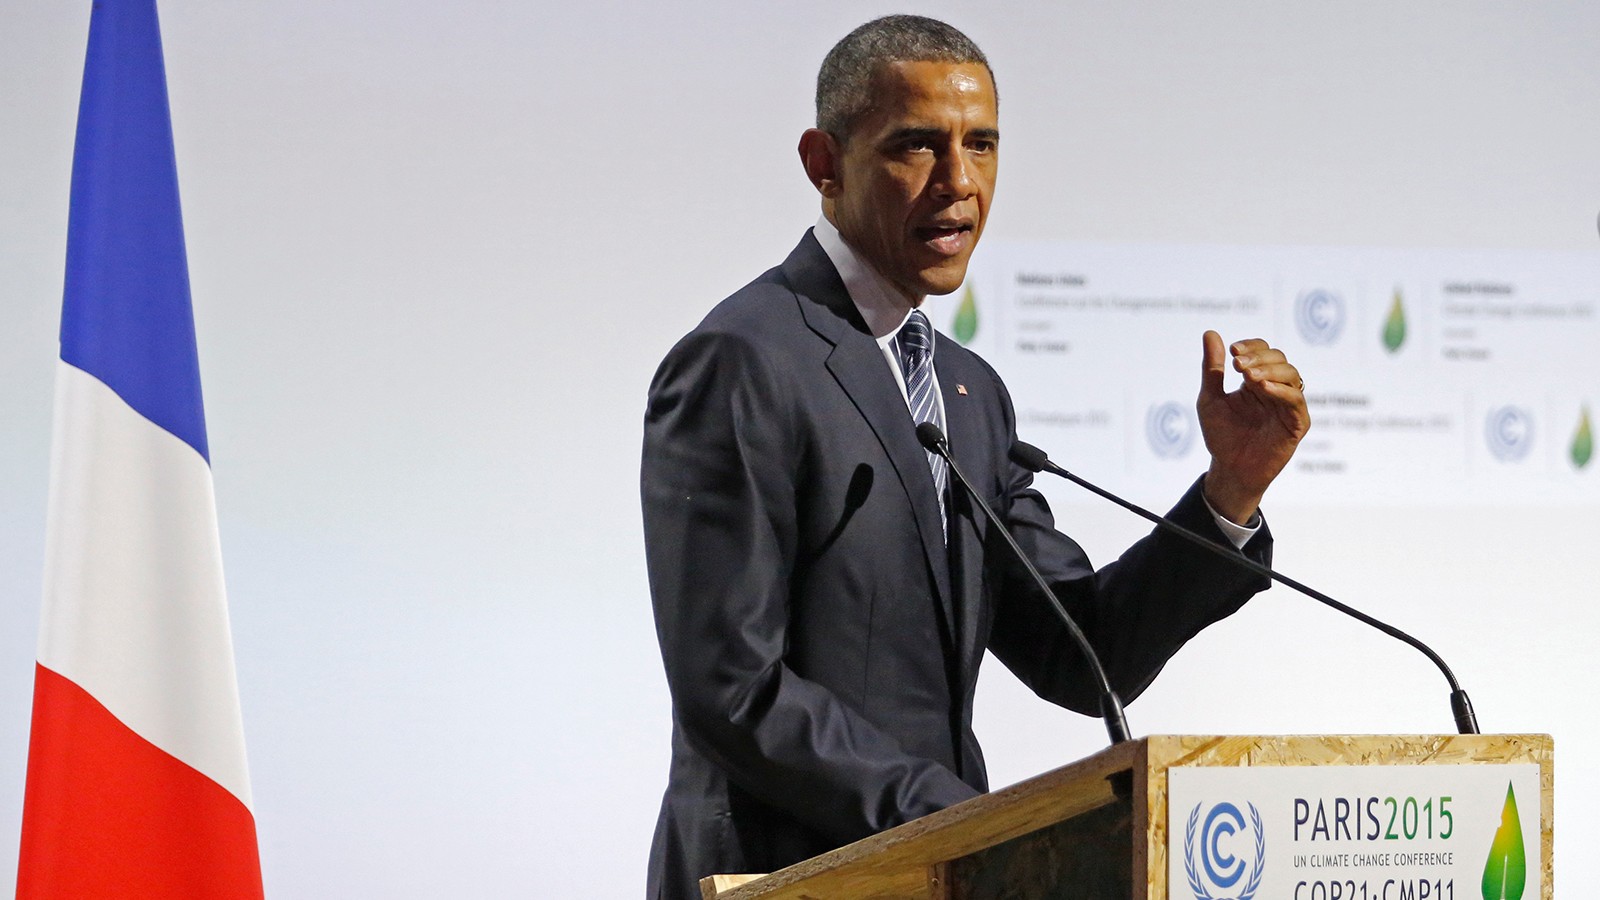 US President Barack Obama delivers a speech on the opening day of the World Climate Change Conference.